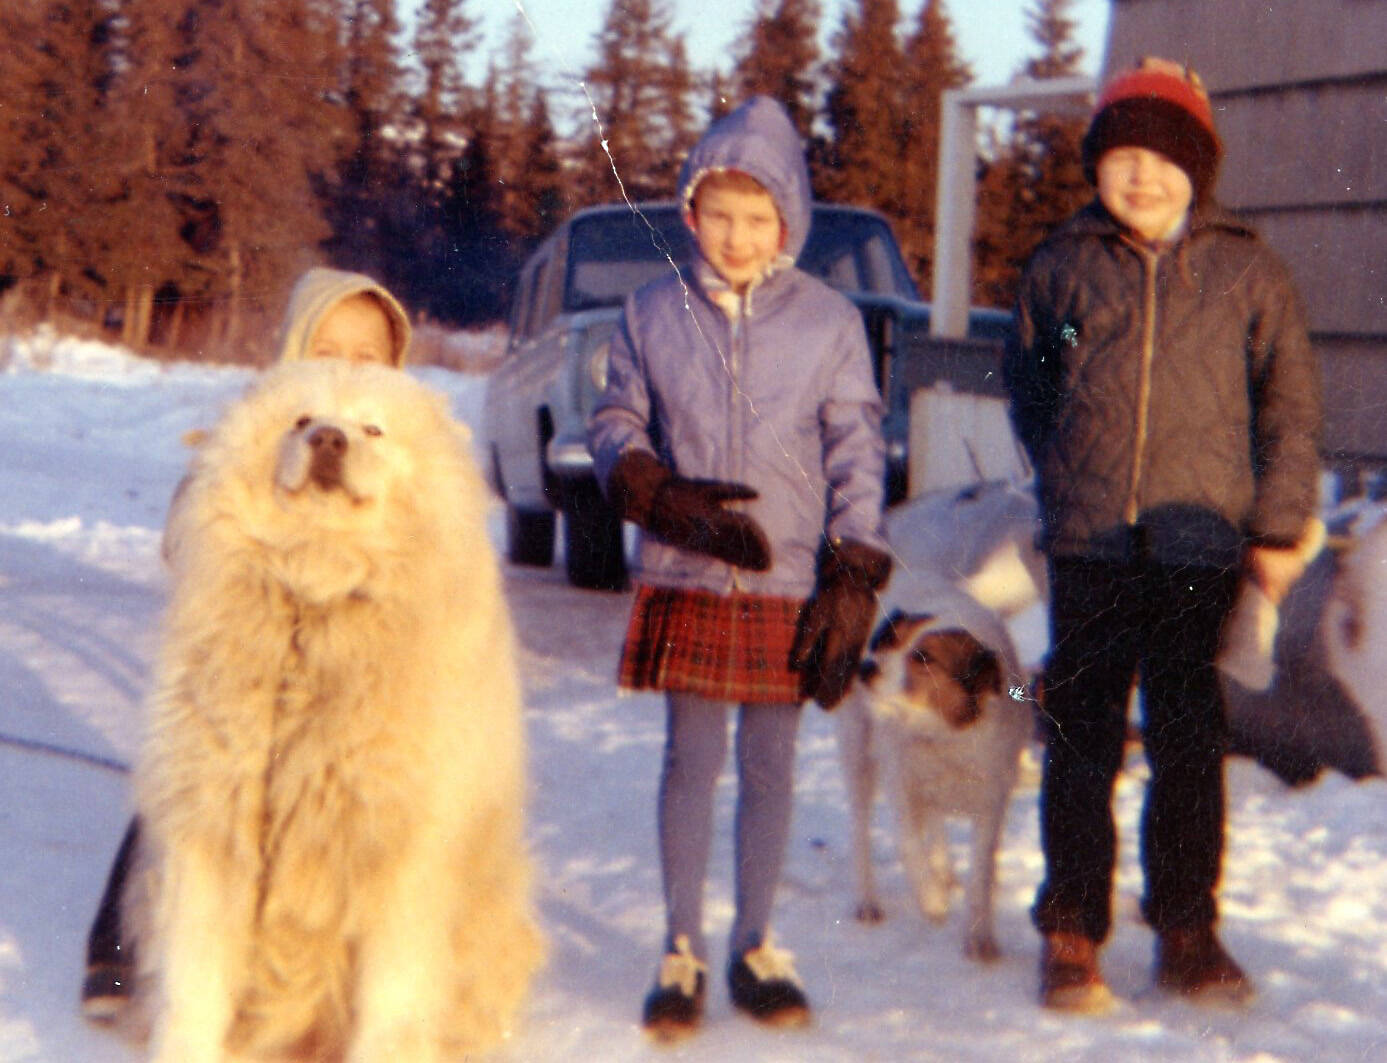 The Fenger children (Peter, at left, behind the dog, Heidi and Eric) pose near their home on the Homer bluff near the airport. Their dogs were Hartford (L) and Flojo.